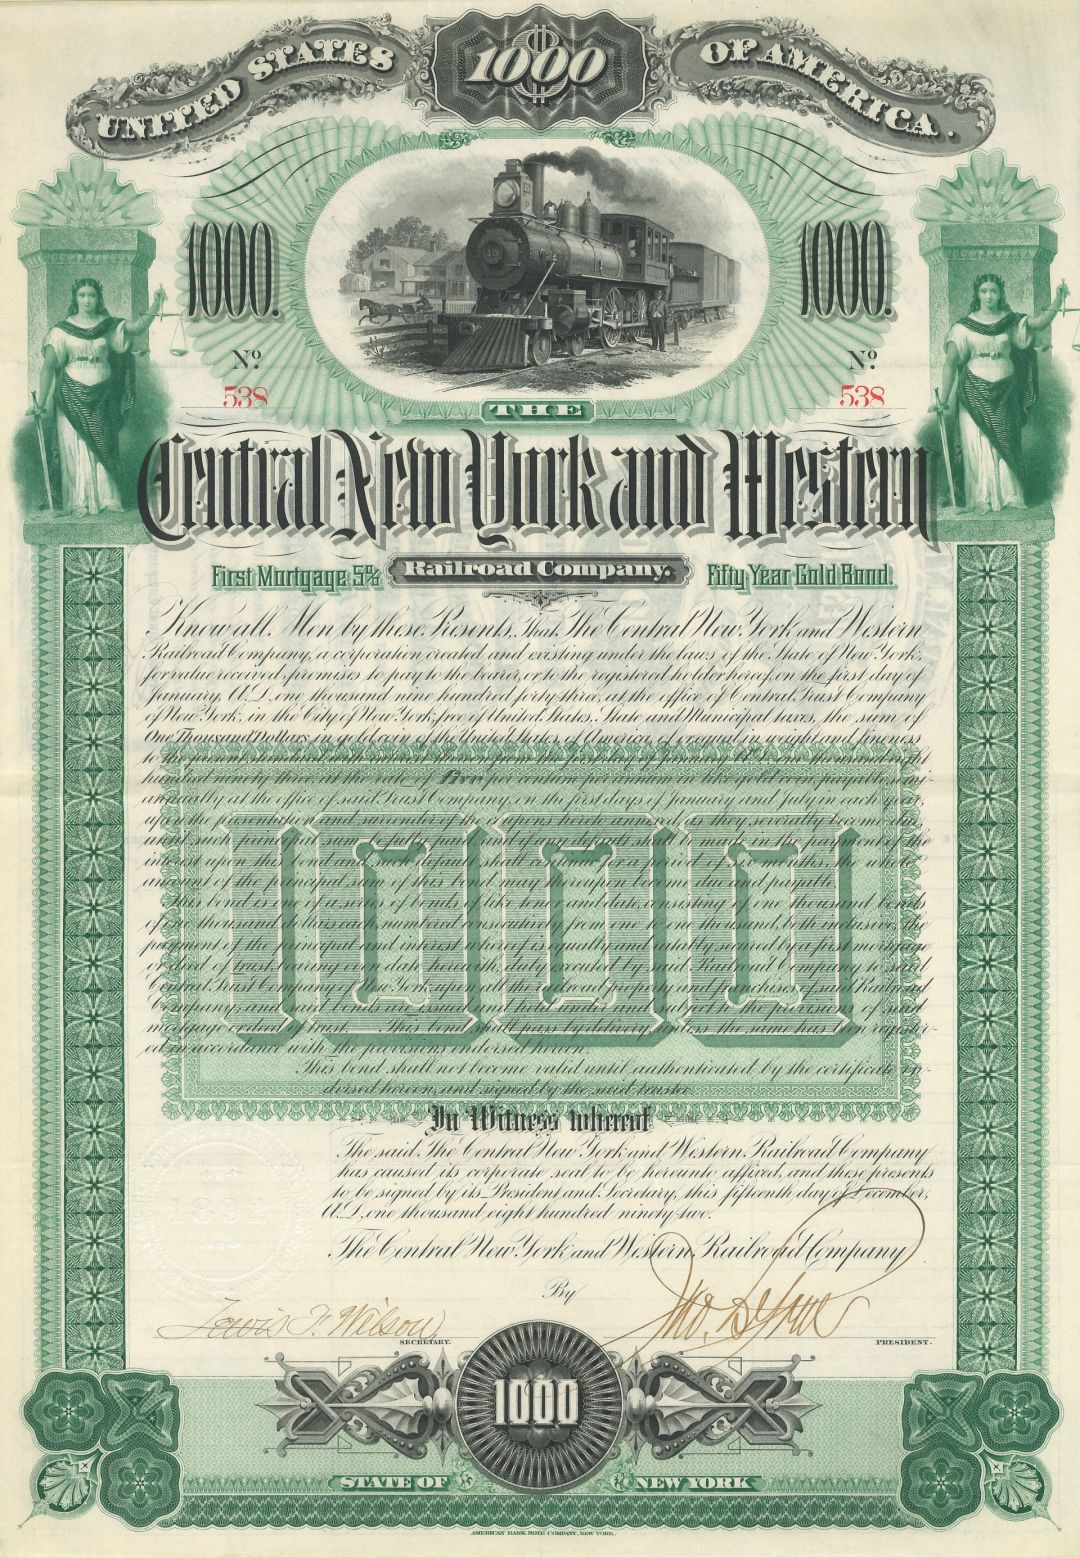 Central New York and Western Railroad Co. - 1892 dated $1,000 Railway Gold Bond - Absolutely Beautiful Design